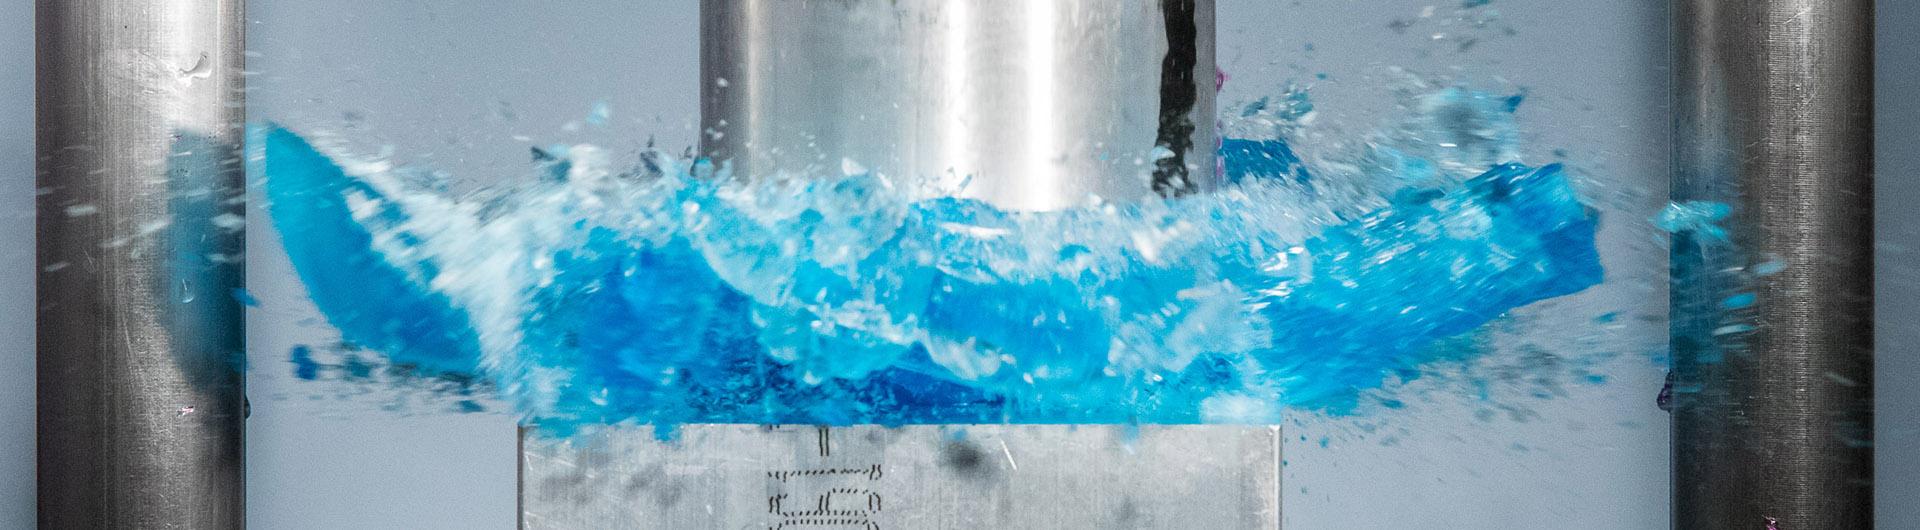 A smashing scientific experiment producing a blue liquid like substance